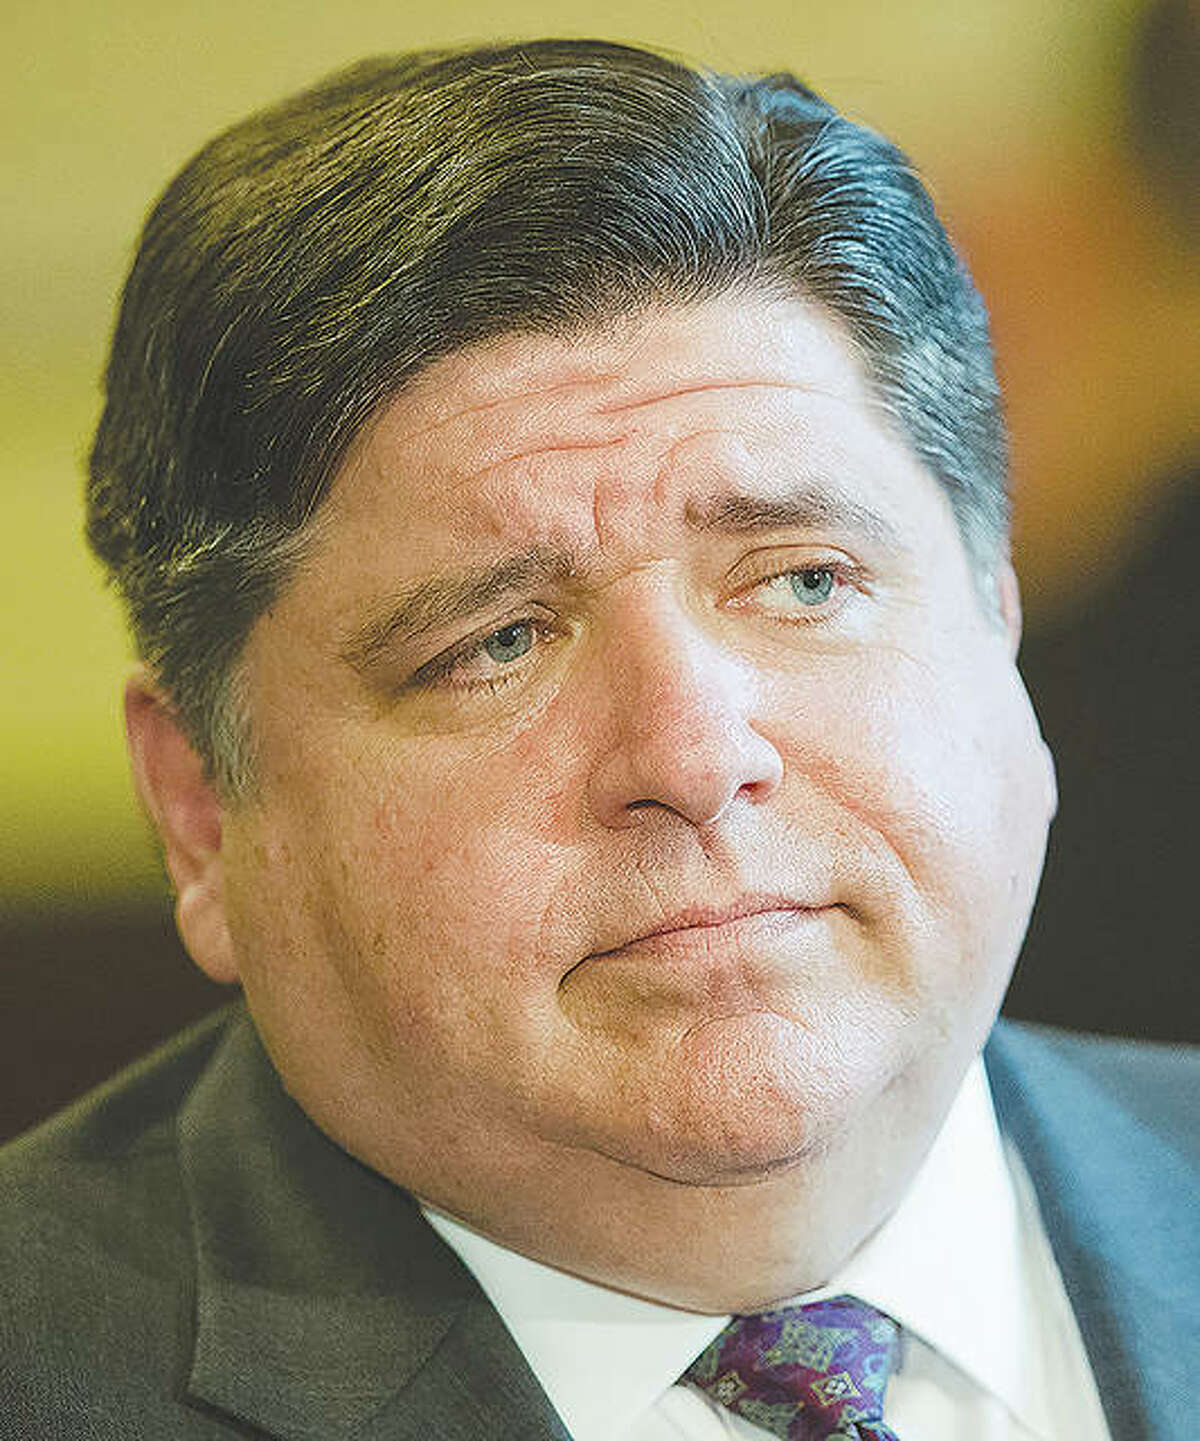 Gov. J.B. Pritzker has spent at least $3 million of his own money for state expenses, including staff raises and building renovations. Experts say the practice is troubling because money spent from private funds isn’t subject to open records laws and gives wealthy candidates an edge. A Pritzker spokeswoman defended the practice, saying the Democrat believes Illinoisans are worth investing in.